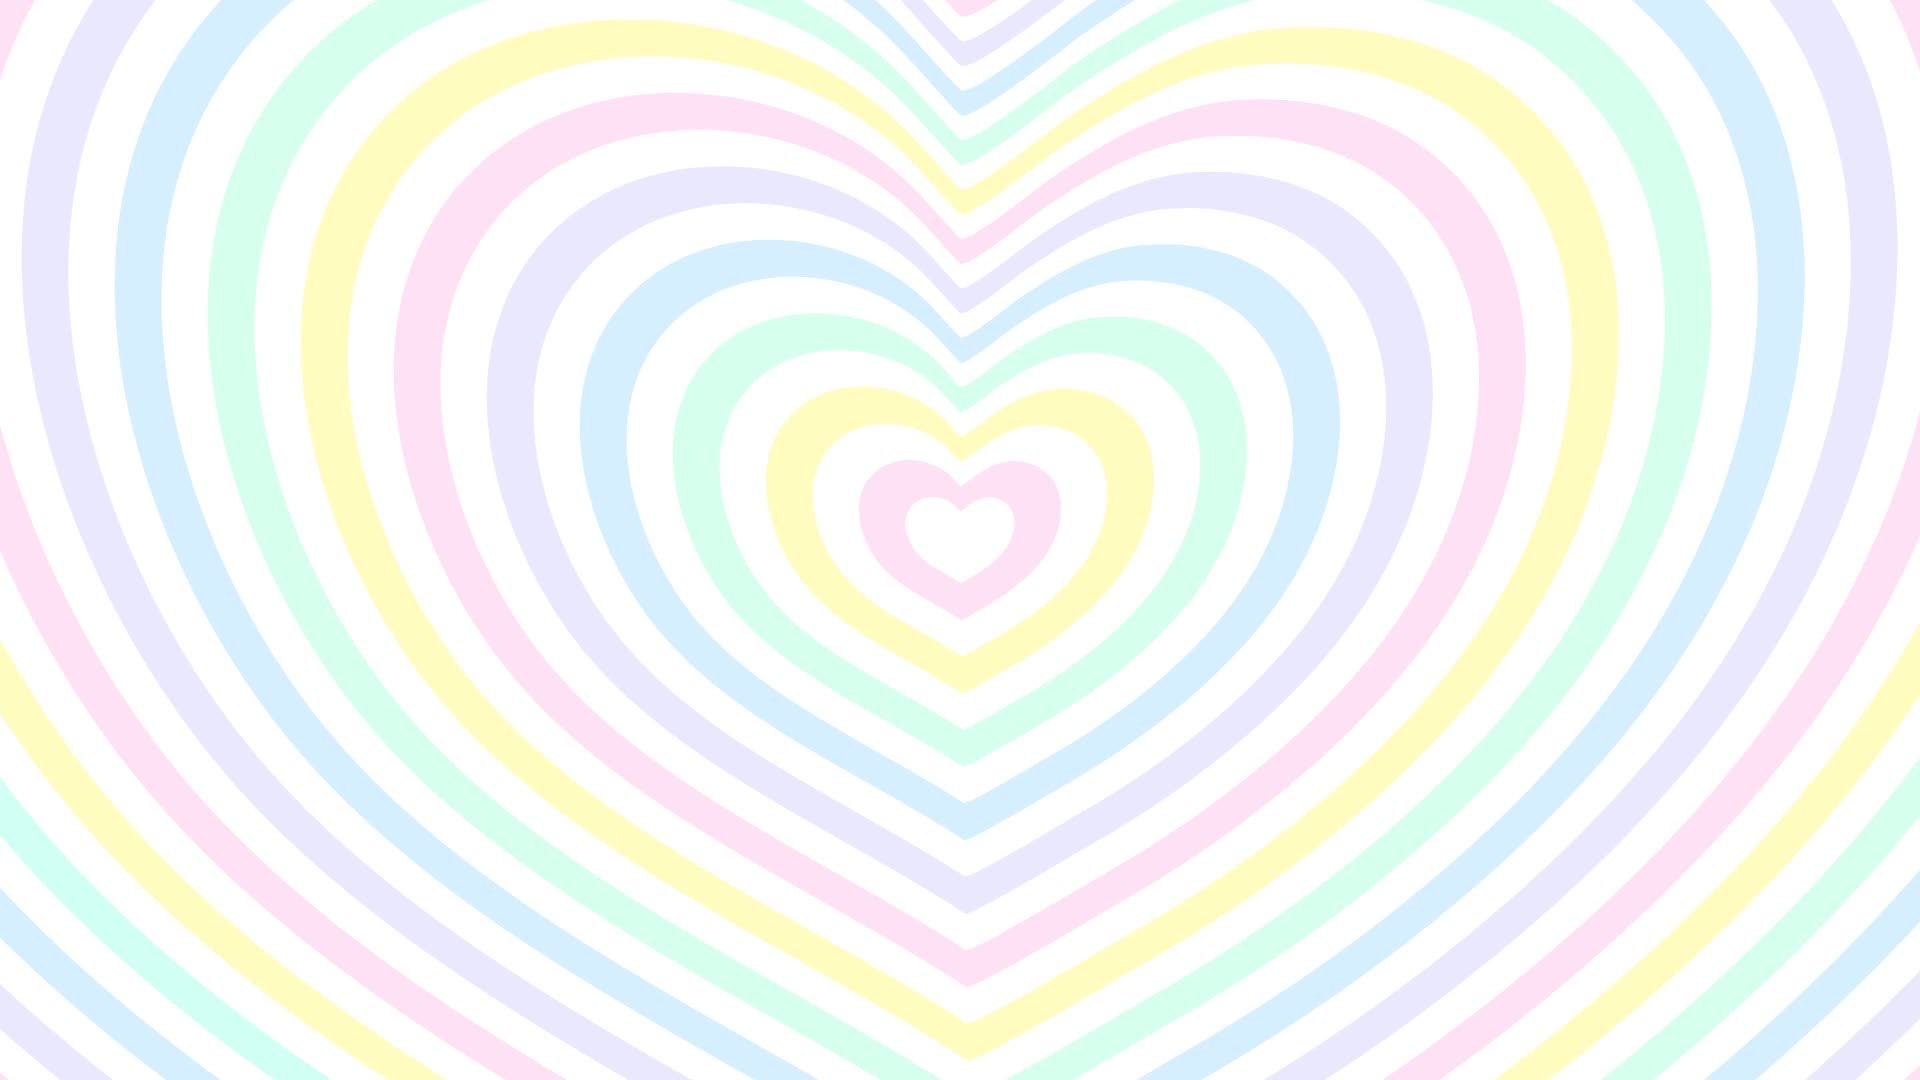 1920x1080 Abstract optical illusion background with a rainbow heart. 11674815 Stock Vide